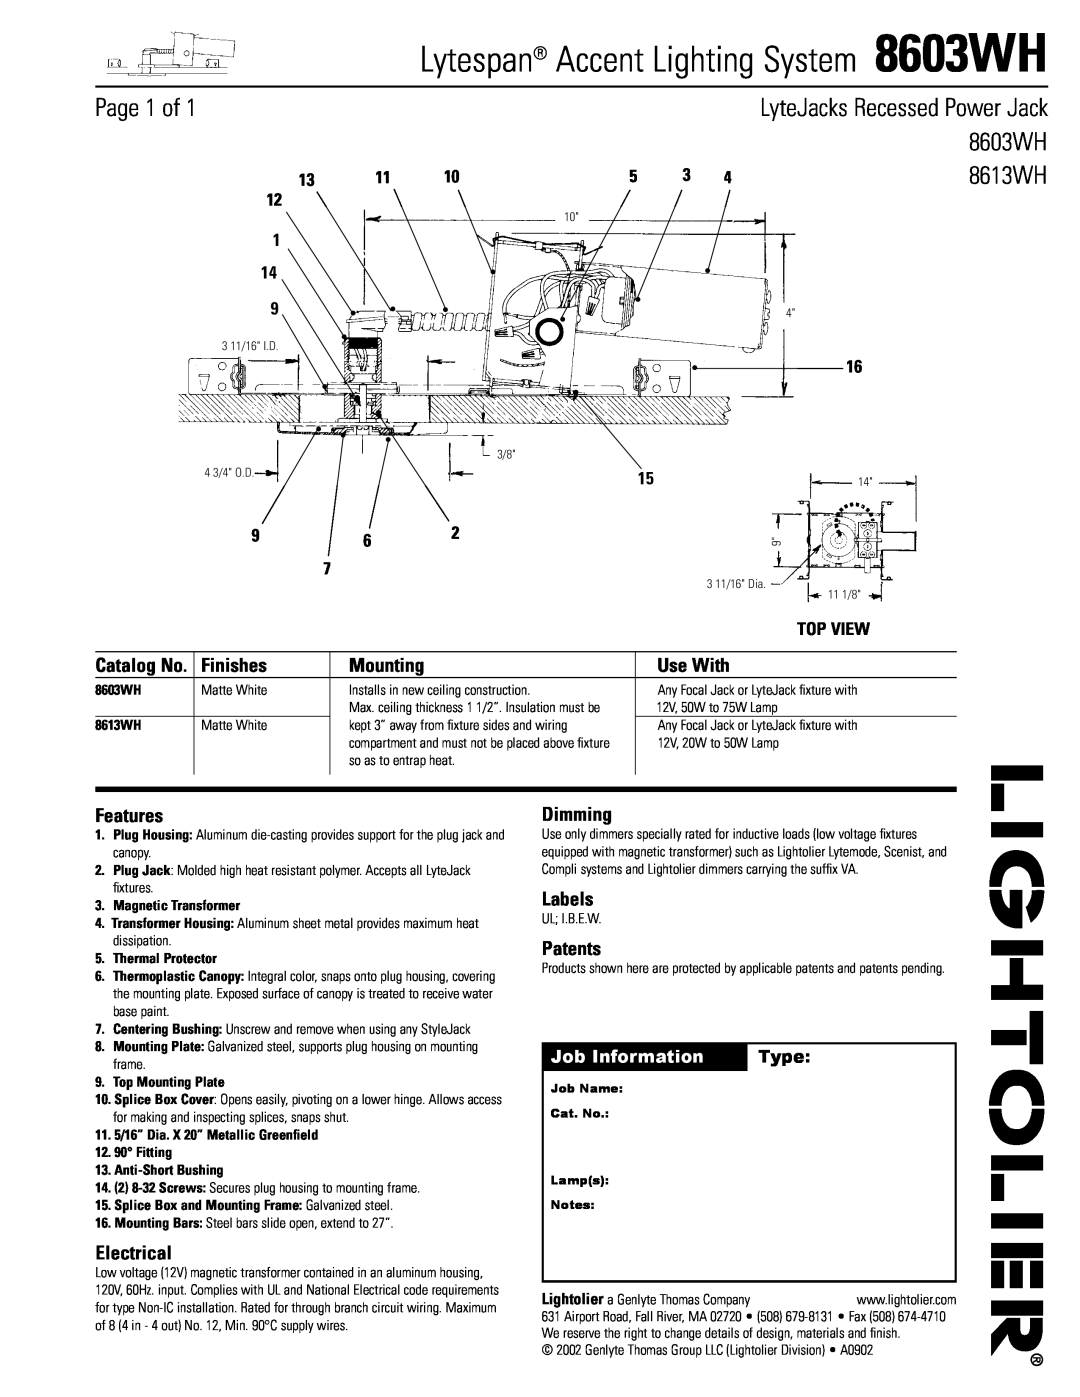 Lightolier 8603WH manual Lytespan Accent Lighting System, 8613WH, LyteJacks Recessed Power Jack, Page 1 of, Finishes, Type 